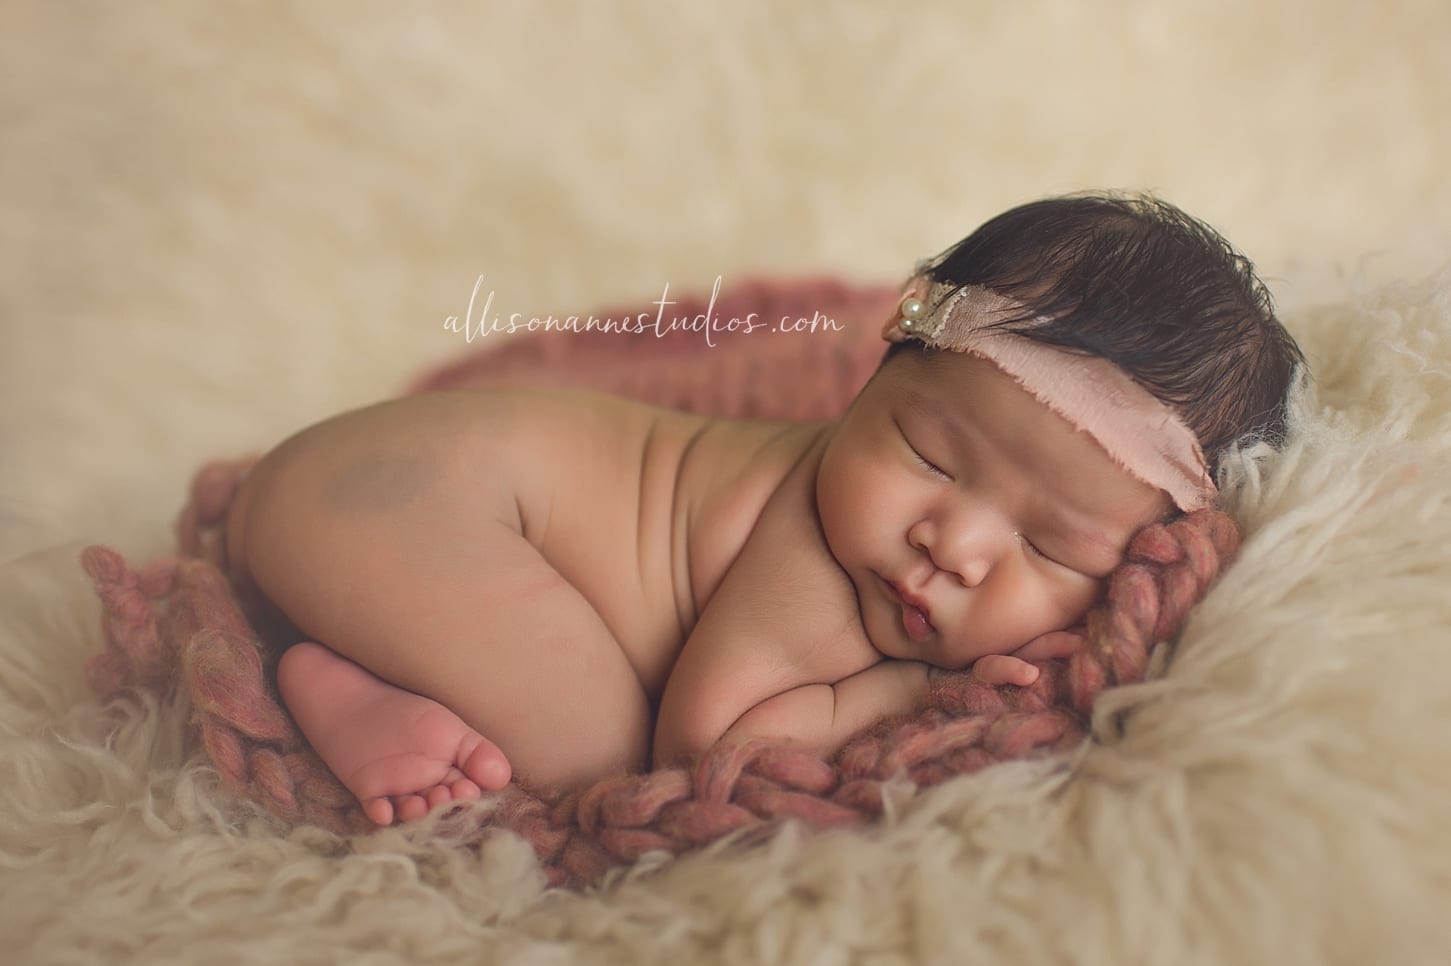 Darla, newborn session, Oh So Fleeting, Petite Boutique, beautiful family, big brothers, little sis, Moorestown, Philly Lawyer, neutral hues, Hammonton, love, Allison Gallagher, AllisonAnne Studios, best newborn Photographer in south jersey